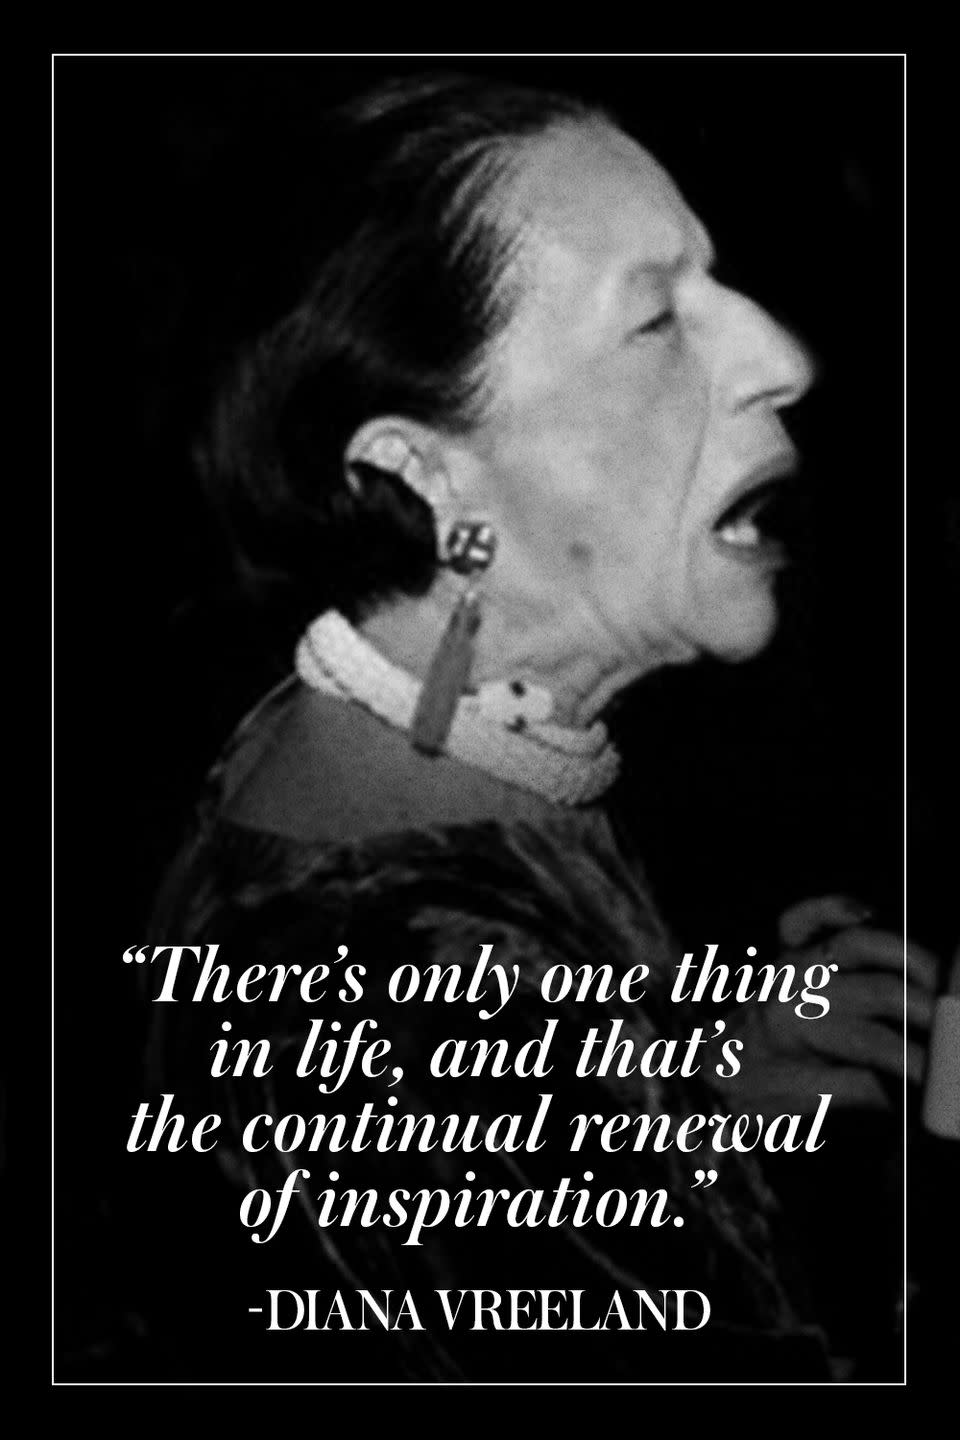 11 of Diana Vreeland's Best Quotes